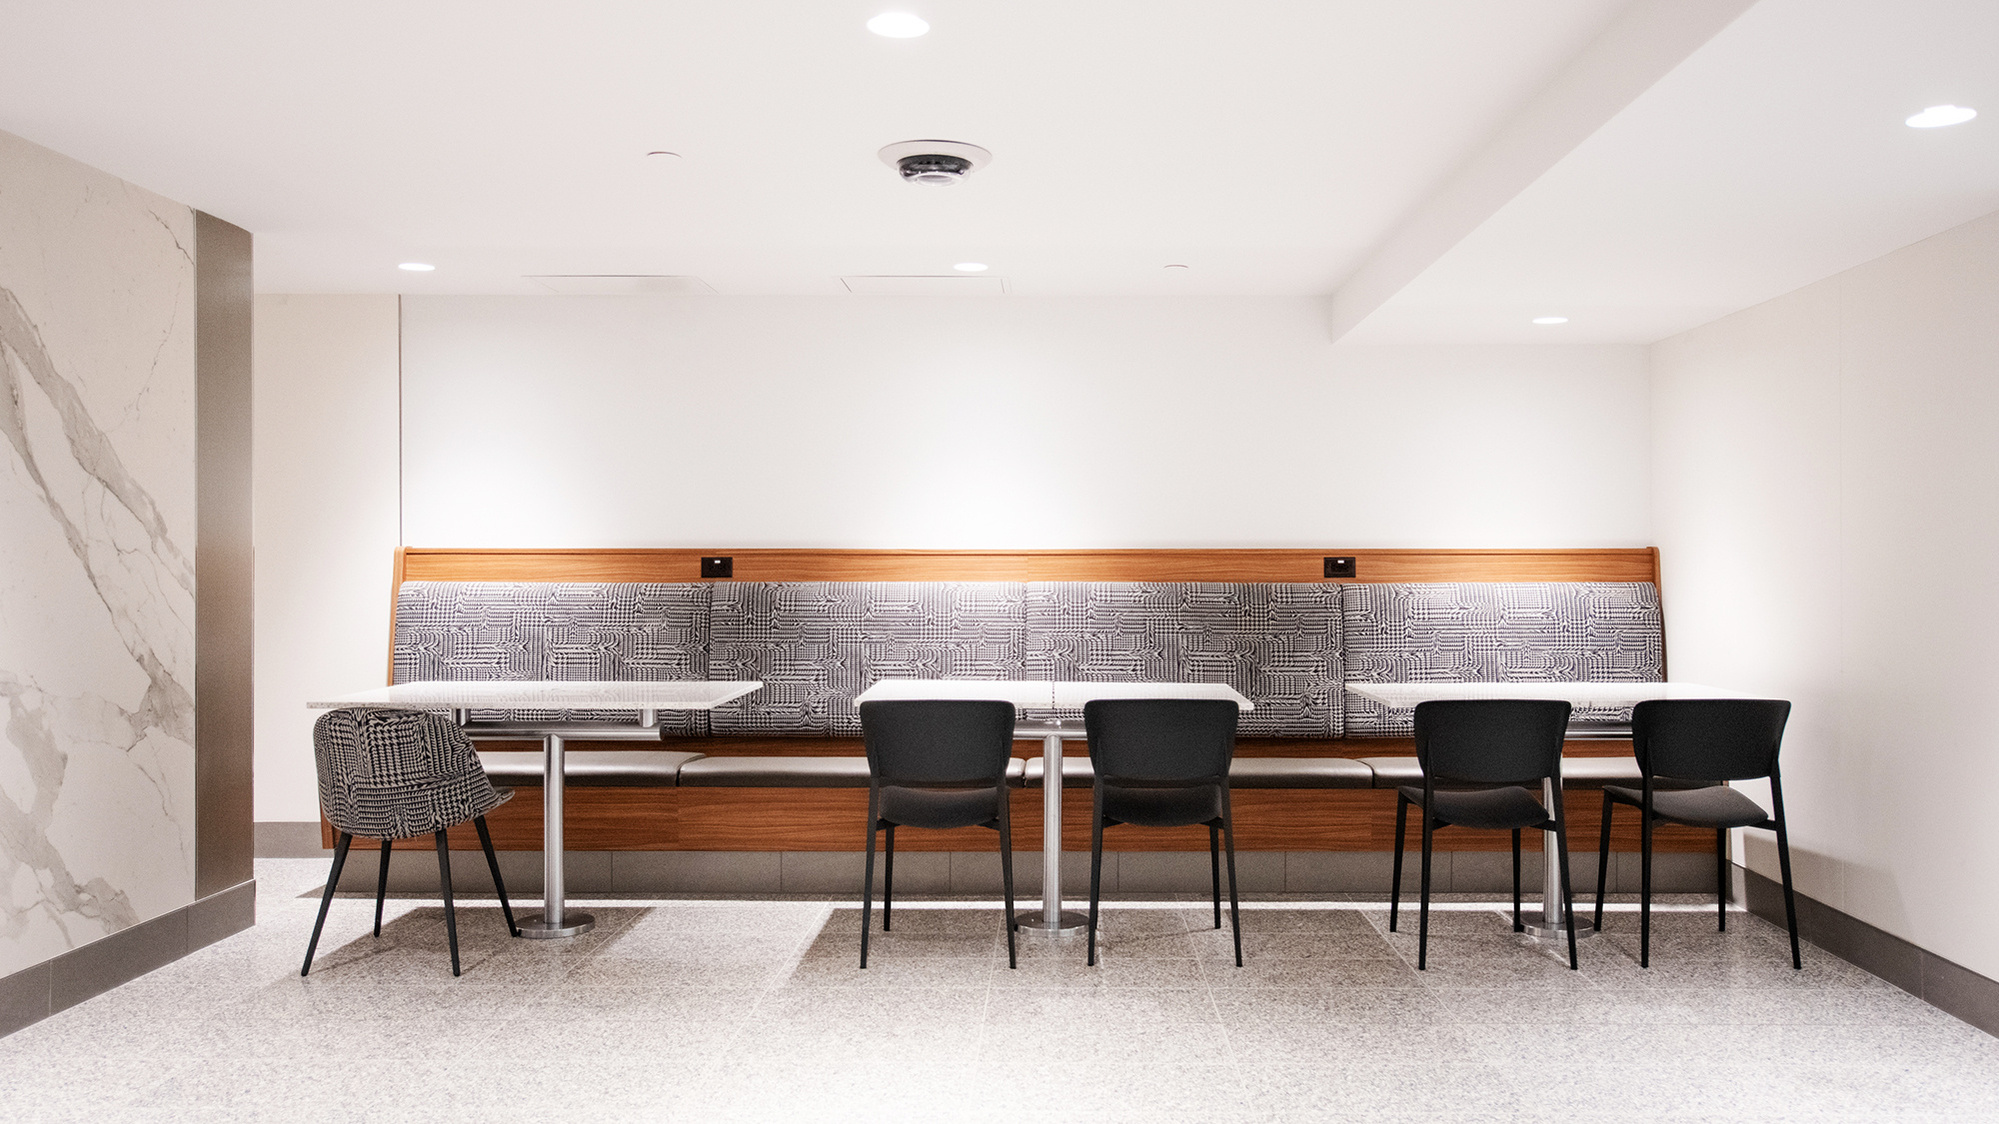 Interior Architectural Photograph at Scotiaplaza food court by Frank Fenn IDEA3